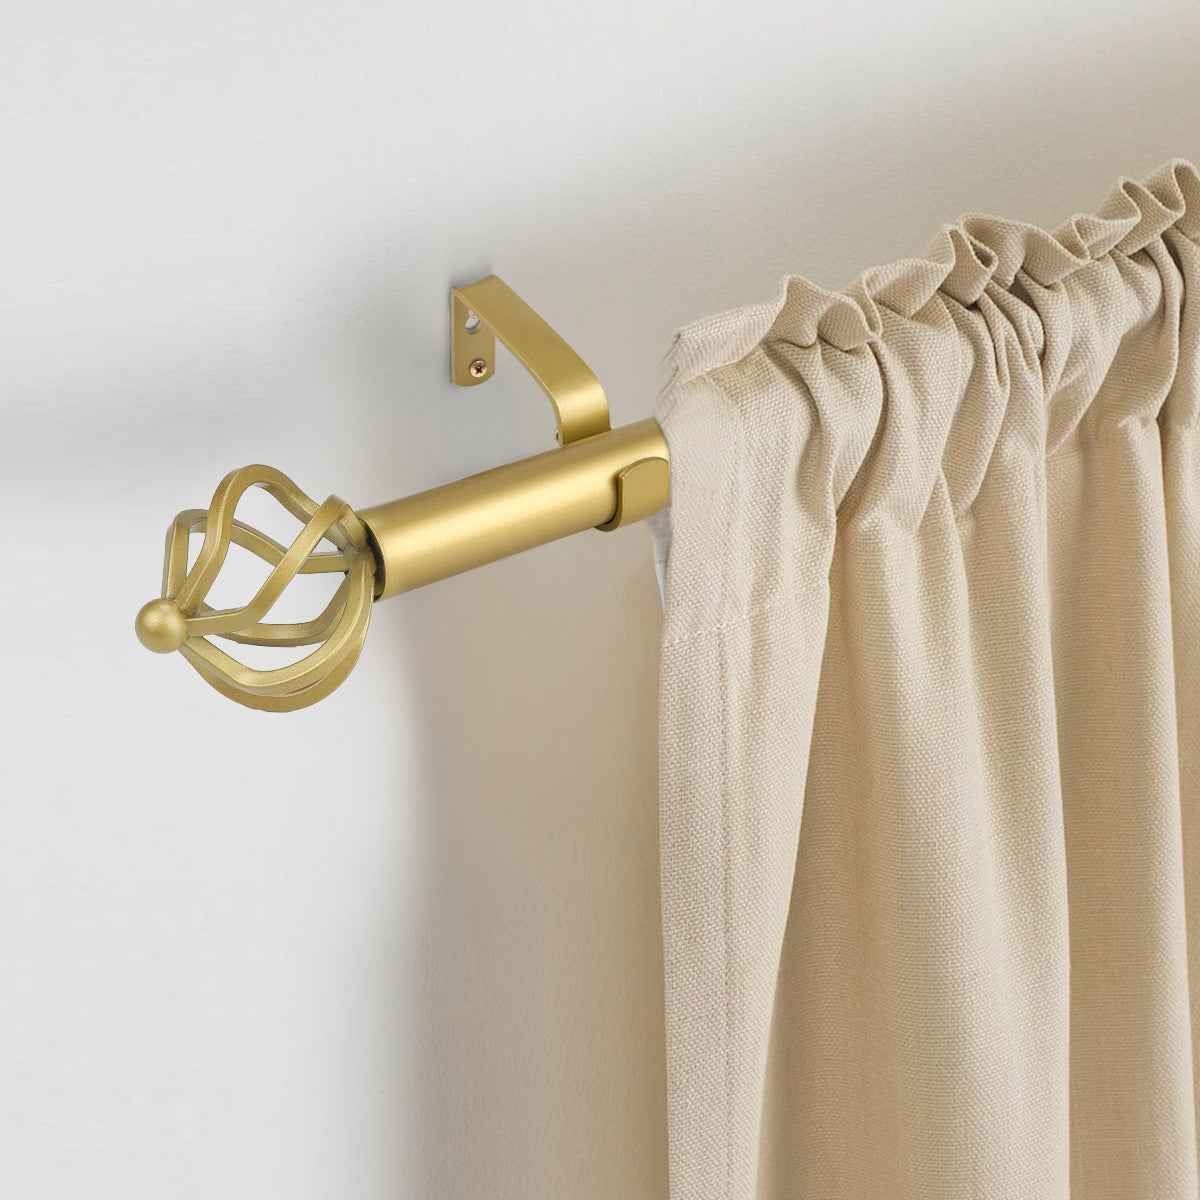 Adjustable Curtain Rod Length from 43 to 51 Inch, with Twisted Cage Finials